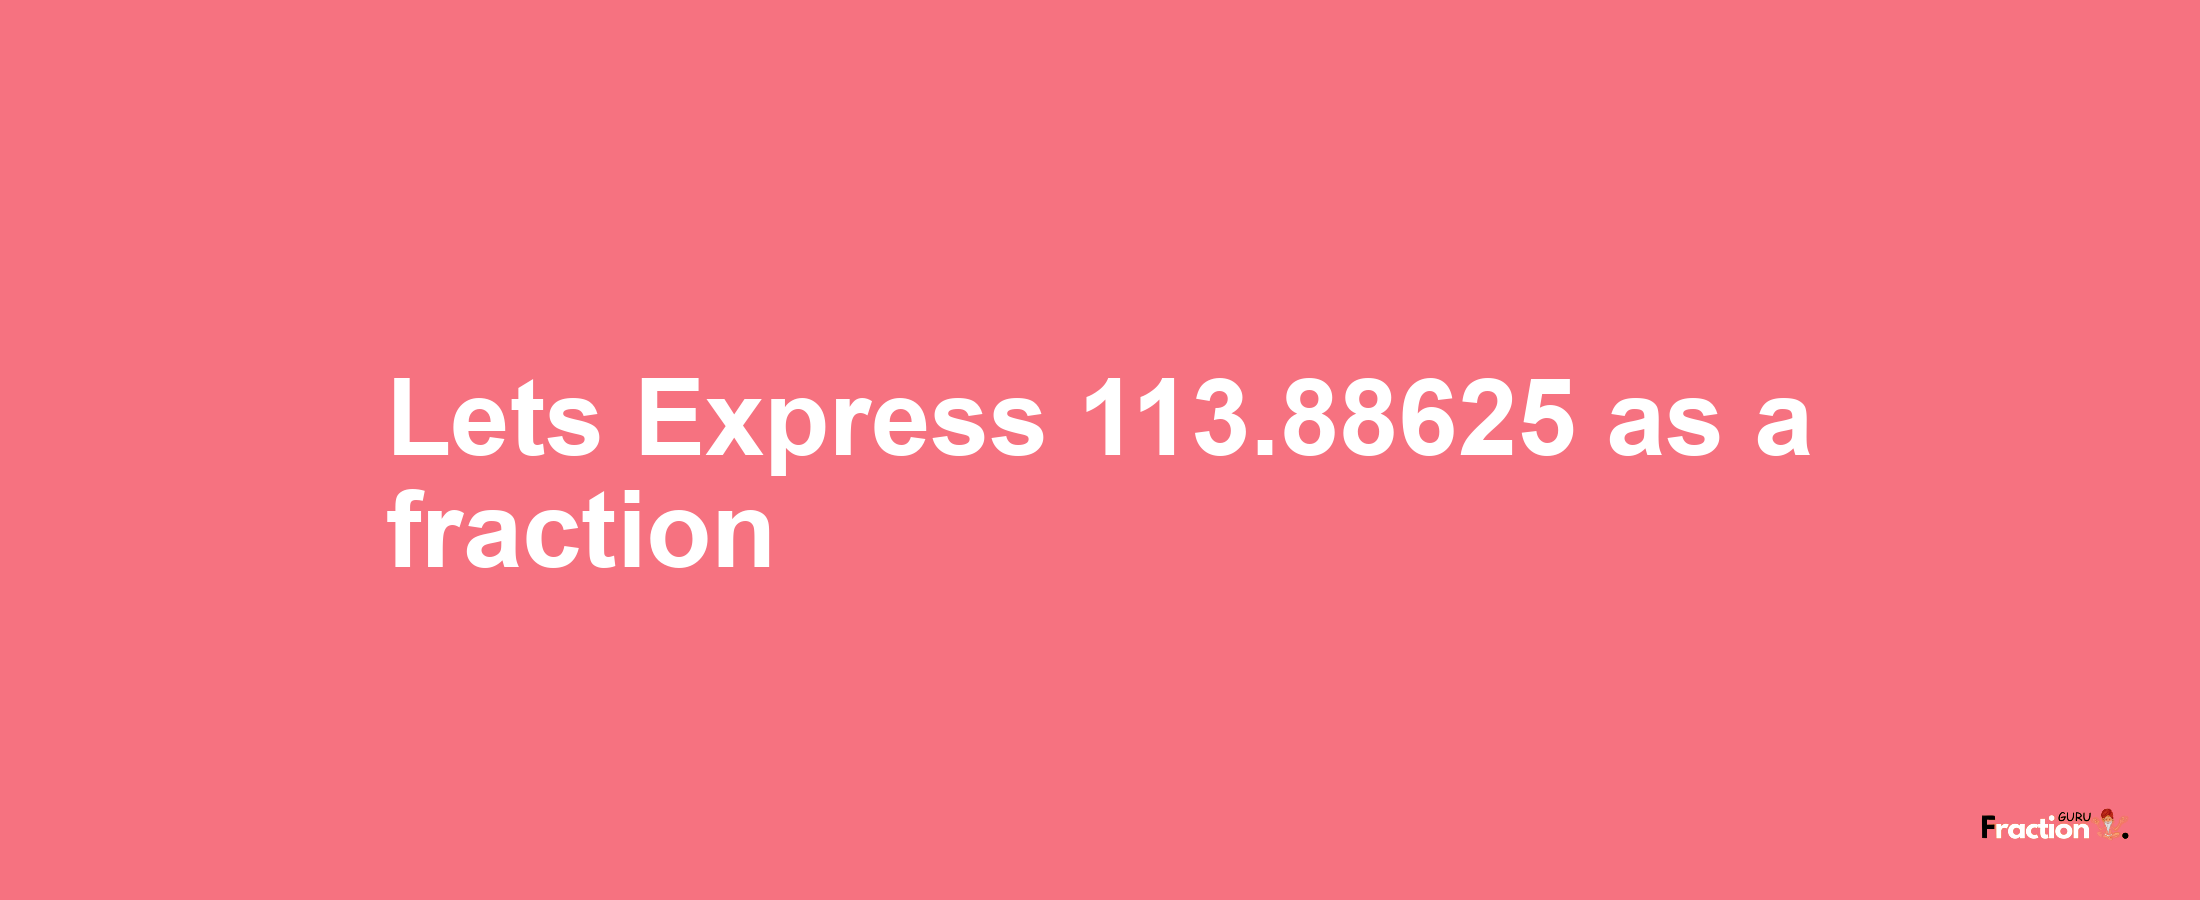 Lets Express 113.88625 as afraction